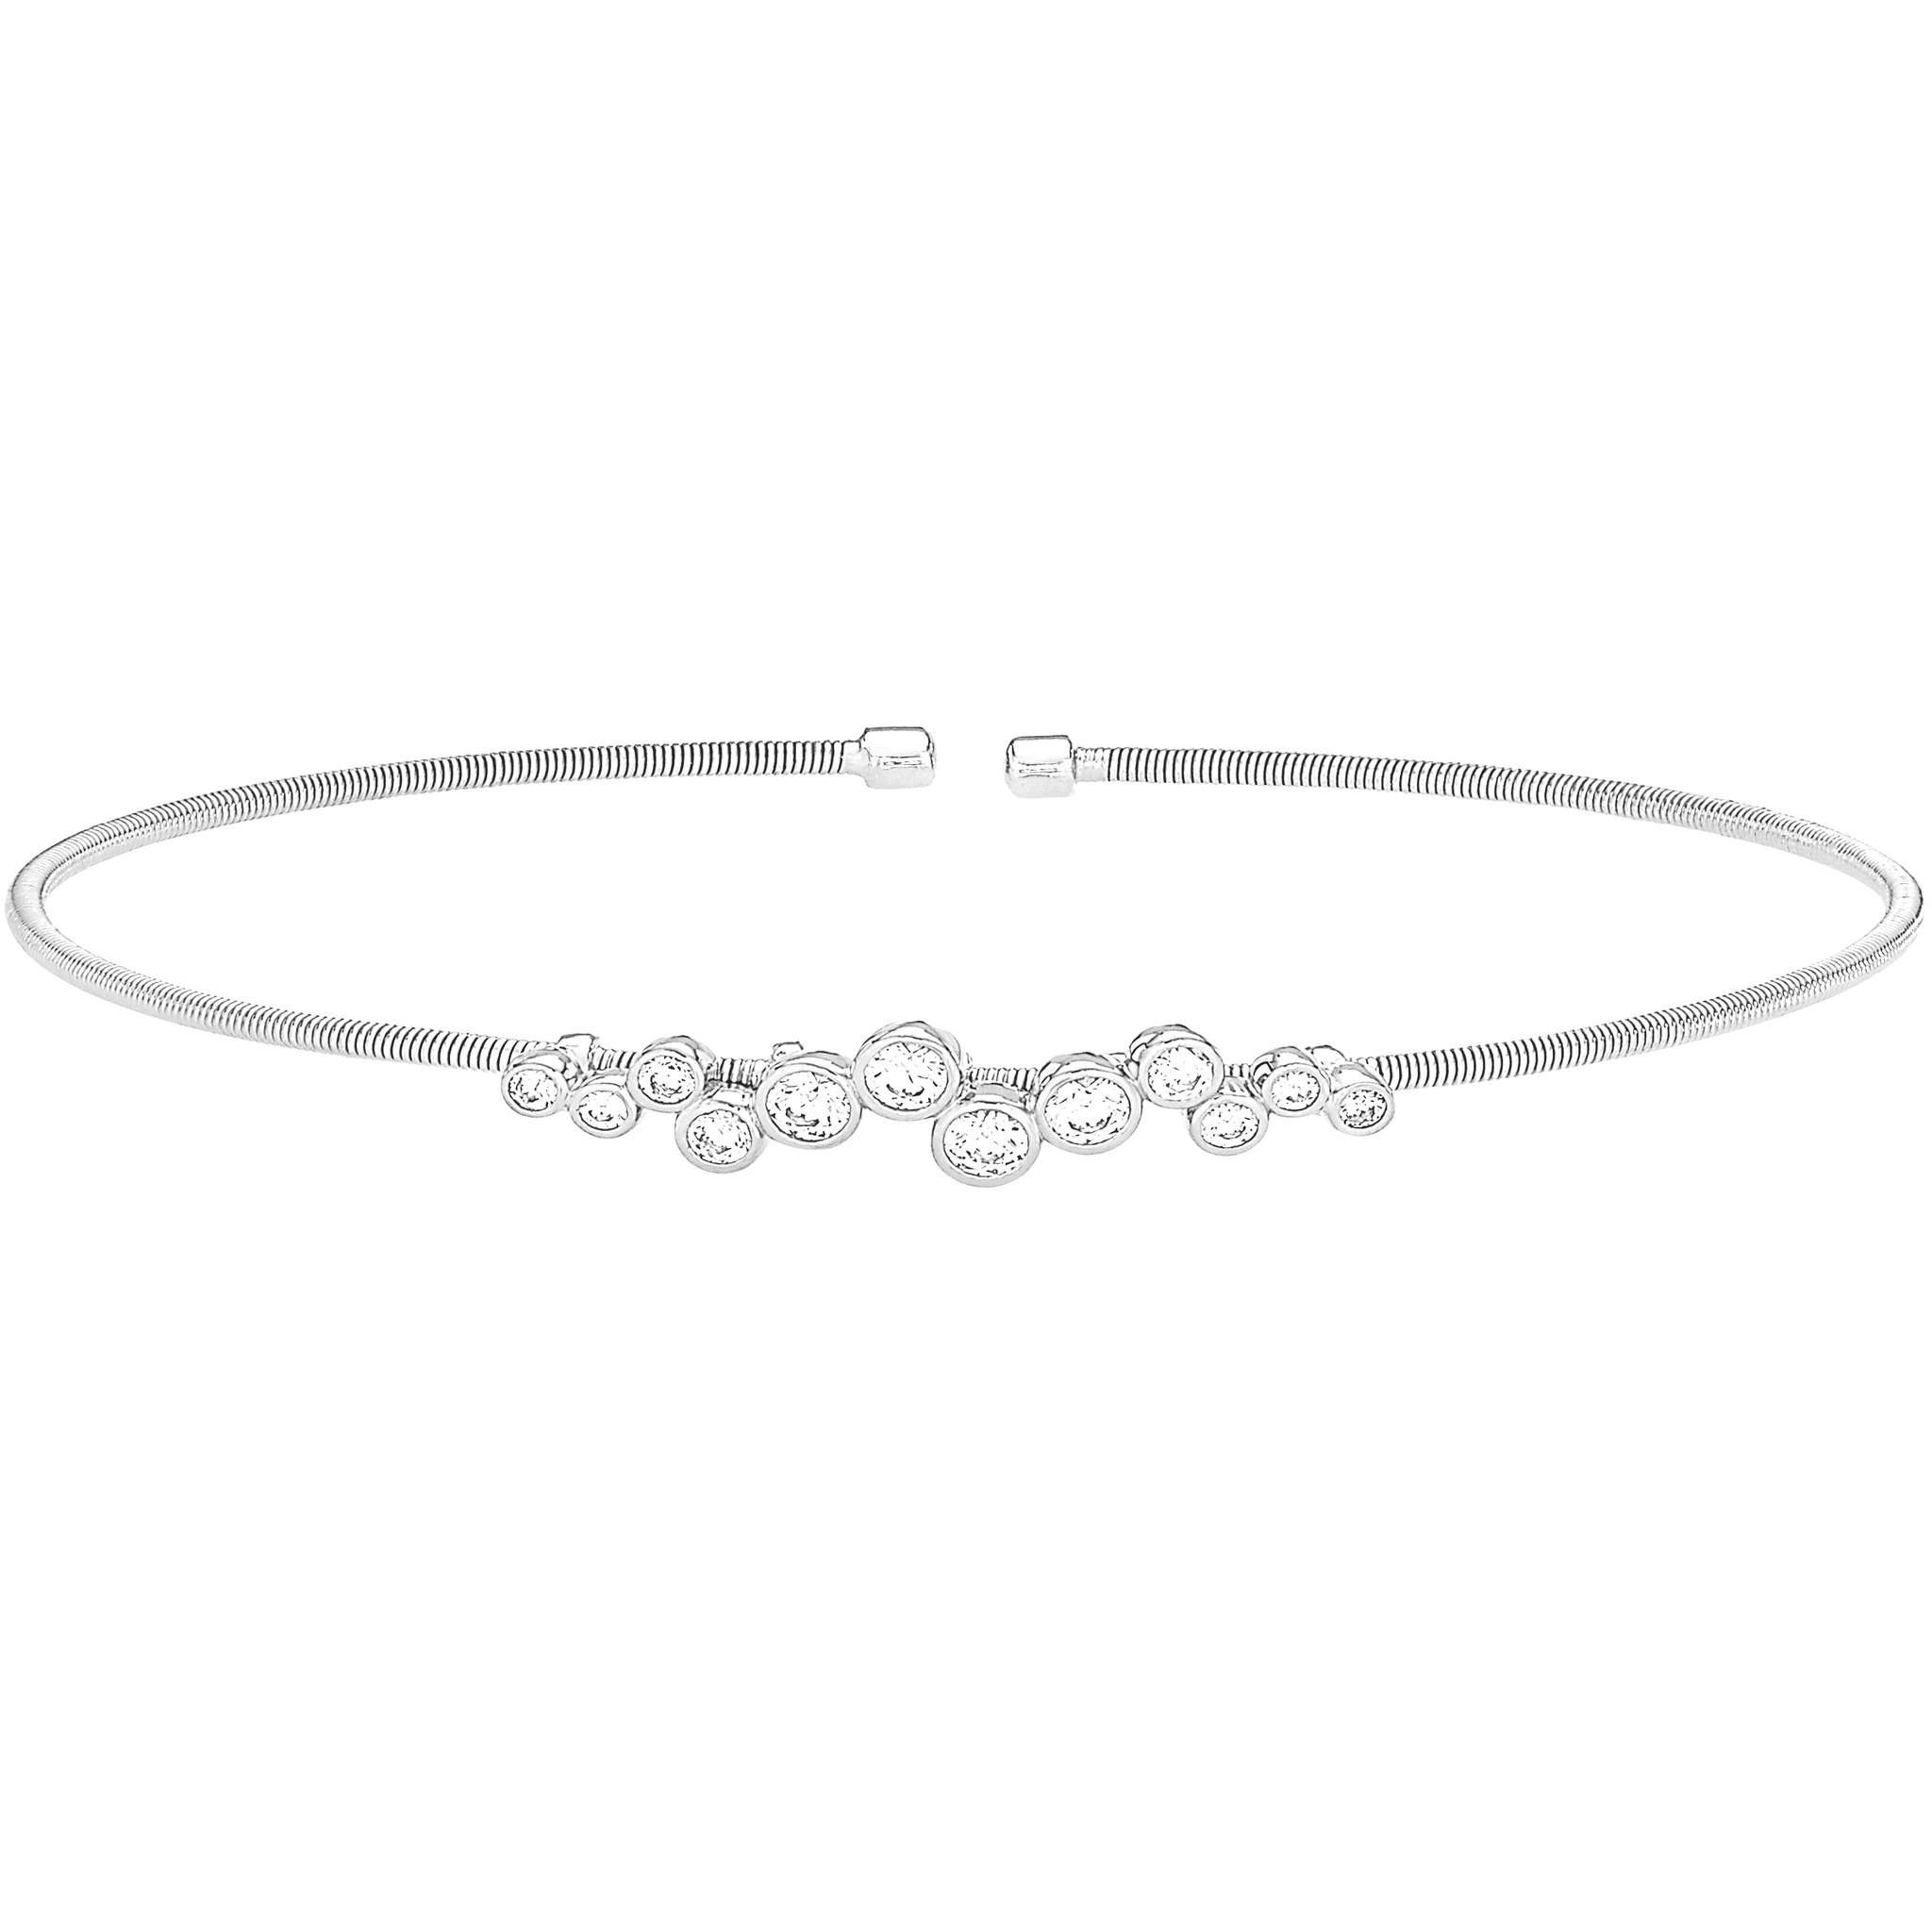 Rhodium Finish Sterling Silver Cable Cuff Bracelet with Bubble Pattern Simulated Diamonds